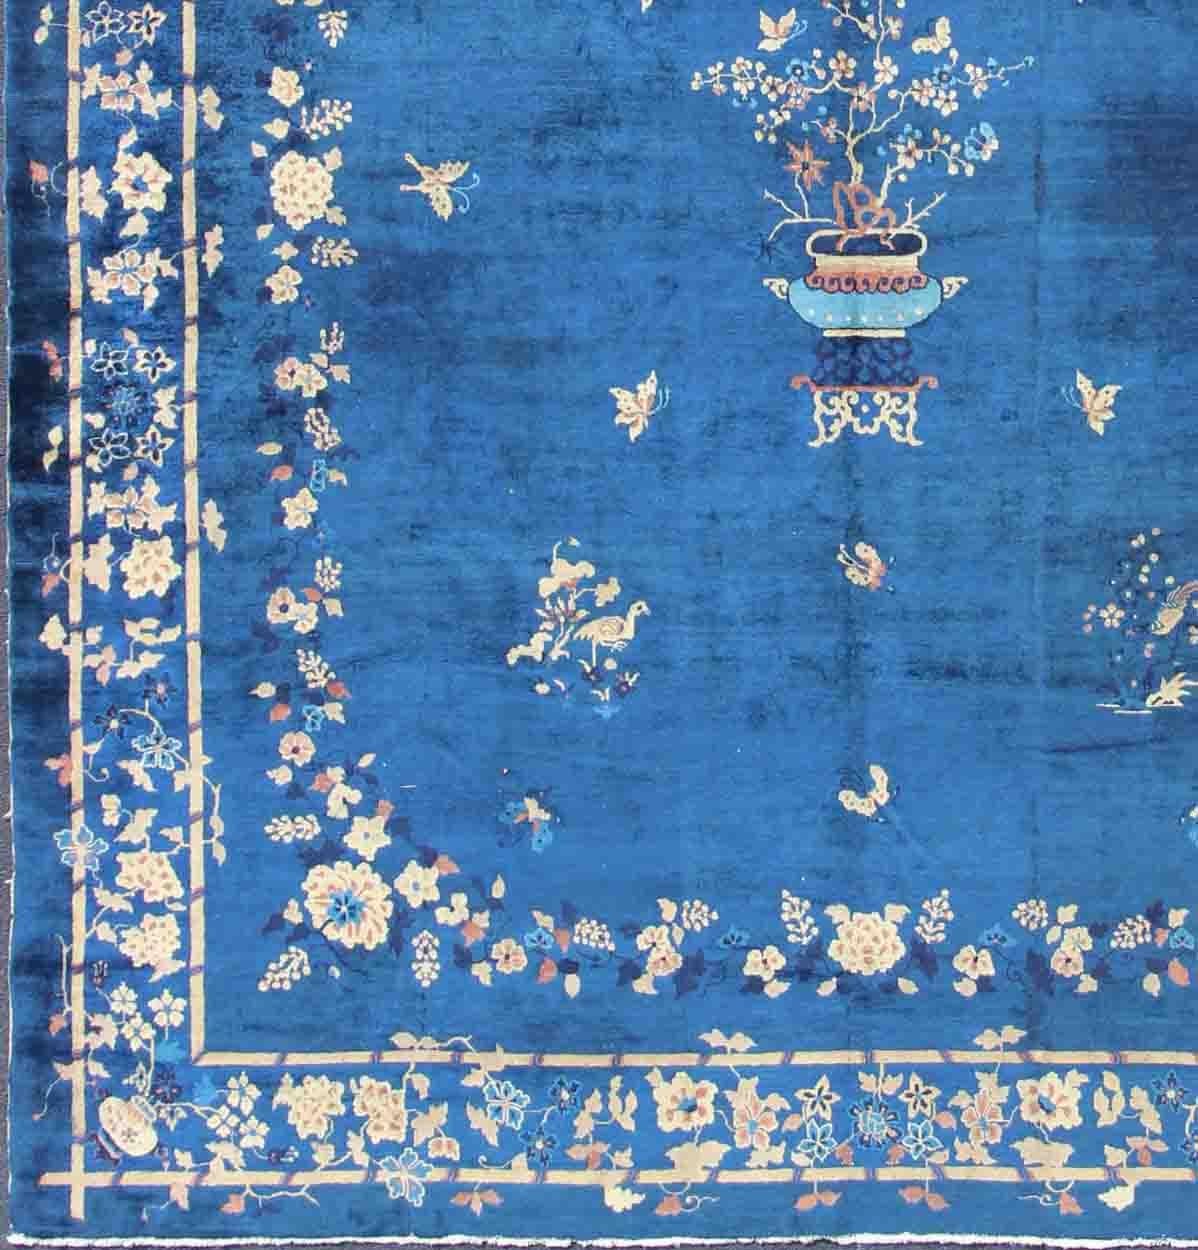 Antique Chinese Peking Rug in Navy Blue with Medallion Flower Vases and Vines. Antique Chinese rug. Chinese Peking rug.  Keivan Woven Arts / rug 19-0802, country of origin / type: China / Peking , circa 1890.
Measures: 12'4 x 14'6.
 Alive with color